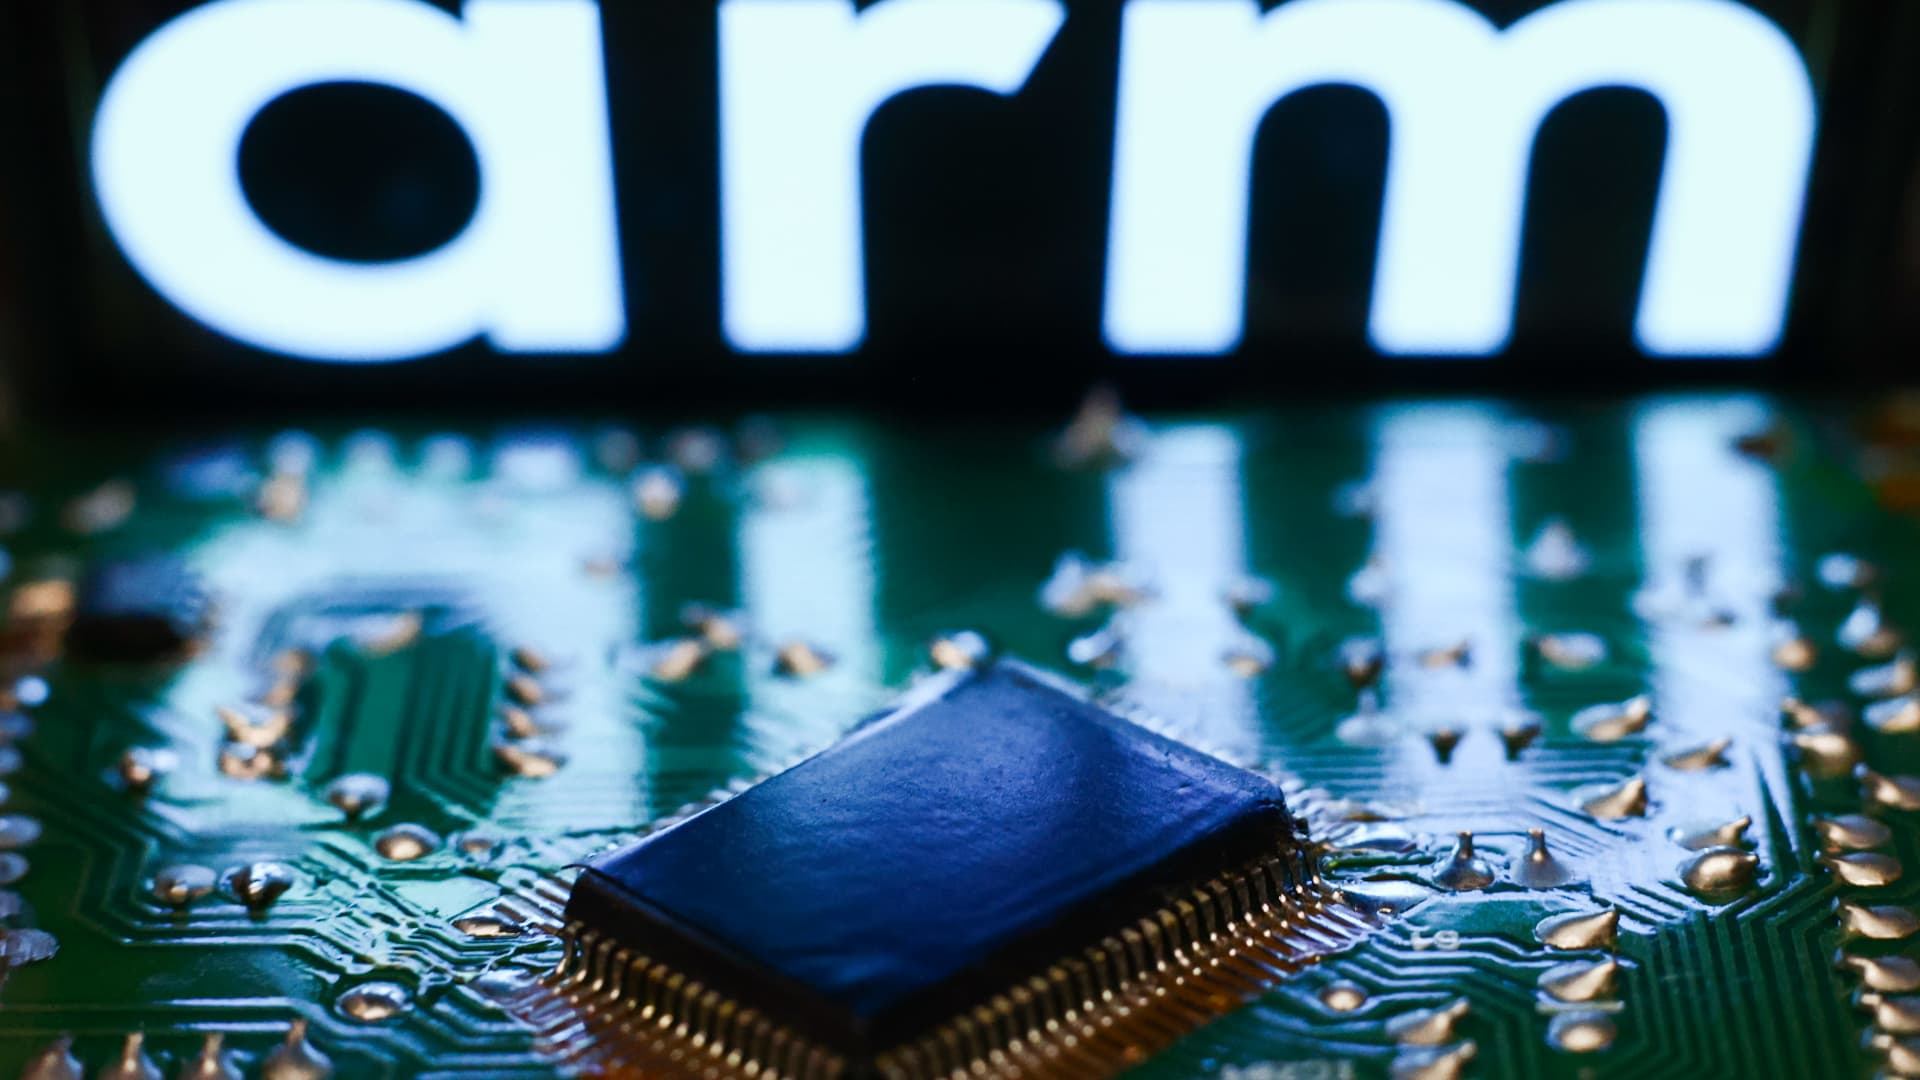 SoftBank’s Arm to begin AI chips by 2025 amid explosive demand